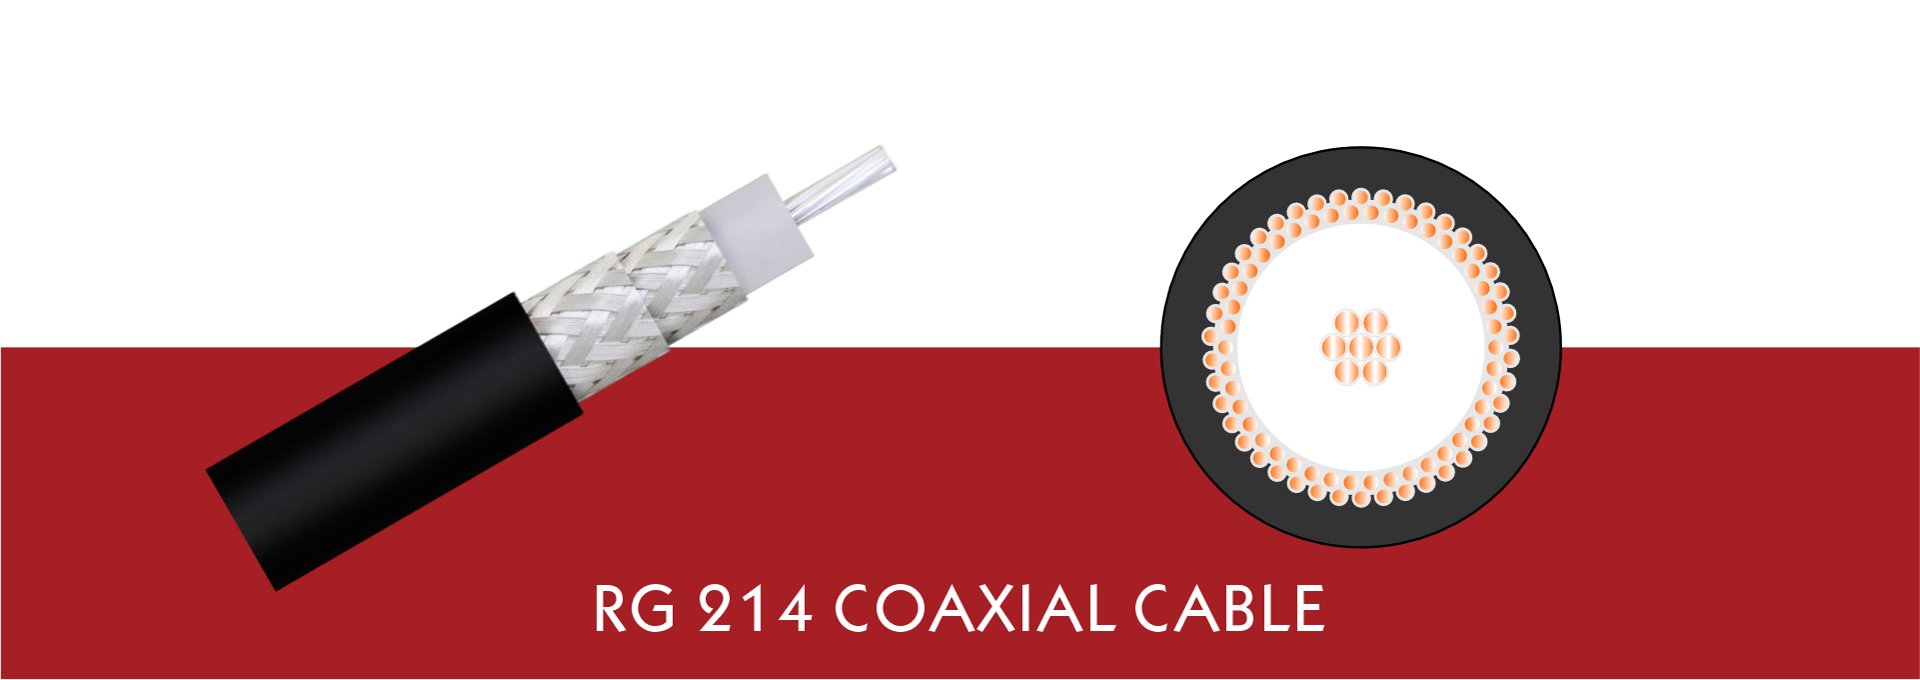 RG 214 COAXIAL CABLE